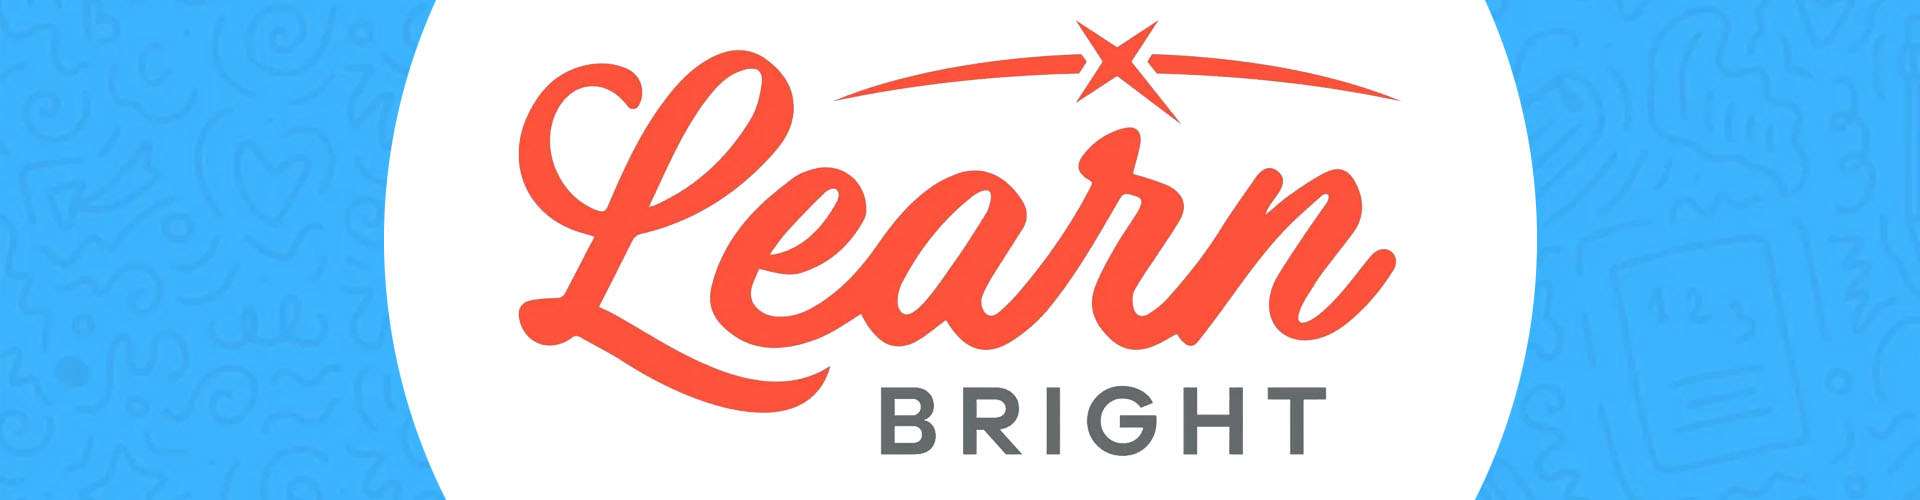 Image for Learn Bright